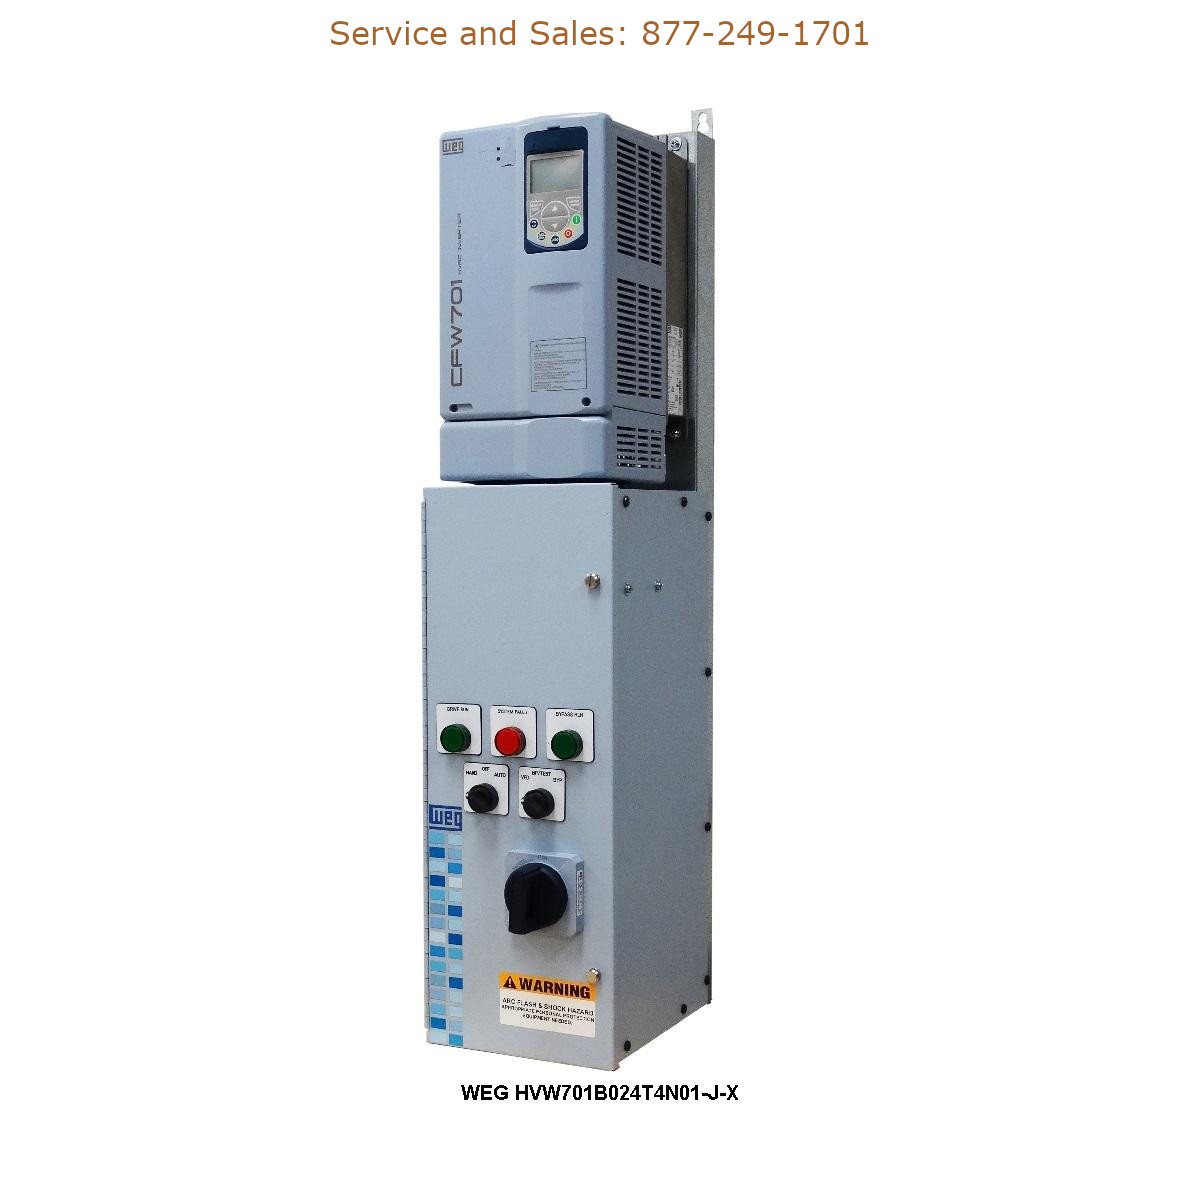 WEG HVW701B024T4N01-J-X WEG Model Number HVW701B024T4N01-J-X WEG Drives, Variable Speed Drives Repair Service, Troubleshooting, Replacement Parts https://gesrepair.com/wp-content/uploads/2022/WEG/WEG_HVW701B024T4N01-J-X_Drives_Variable_Speed_Drives.jpg